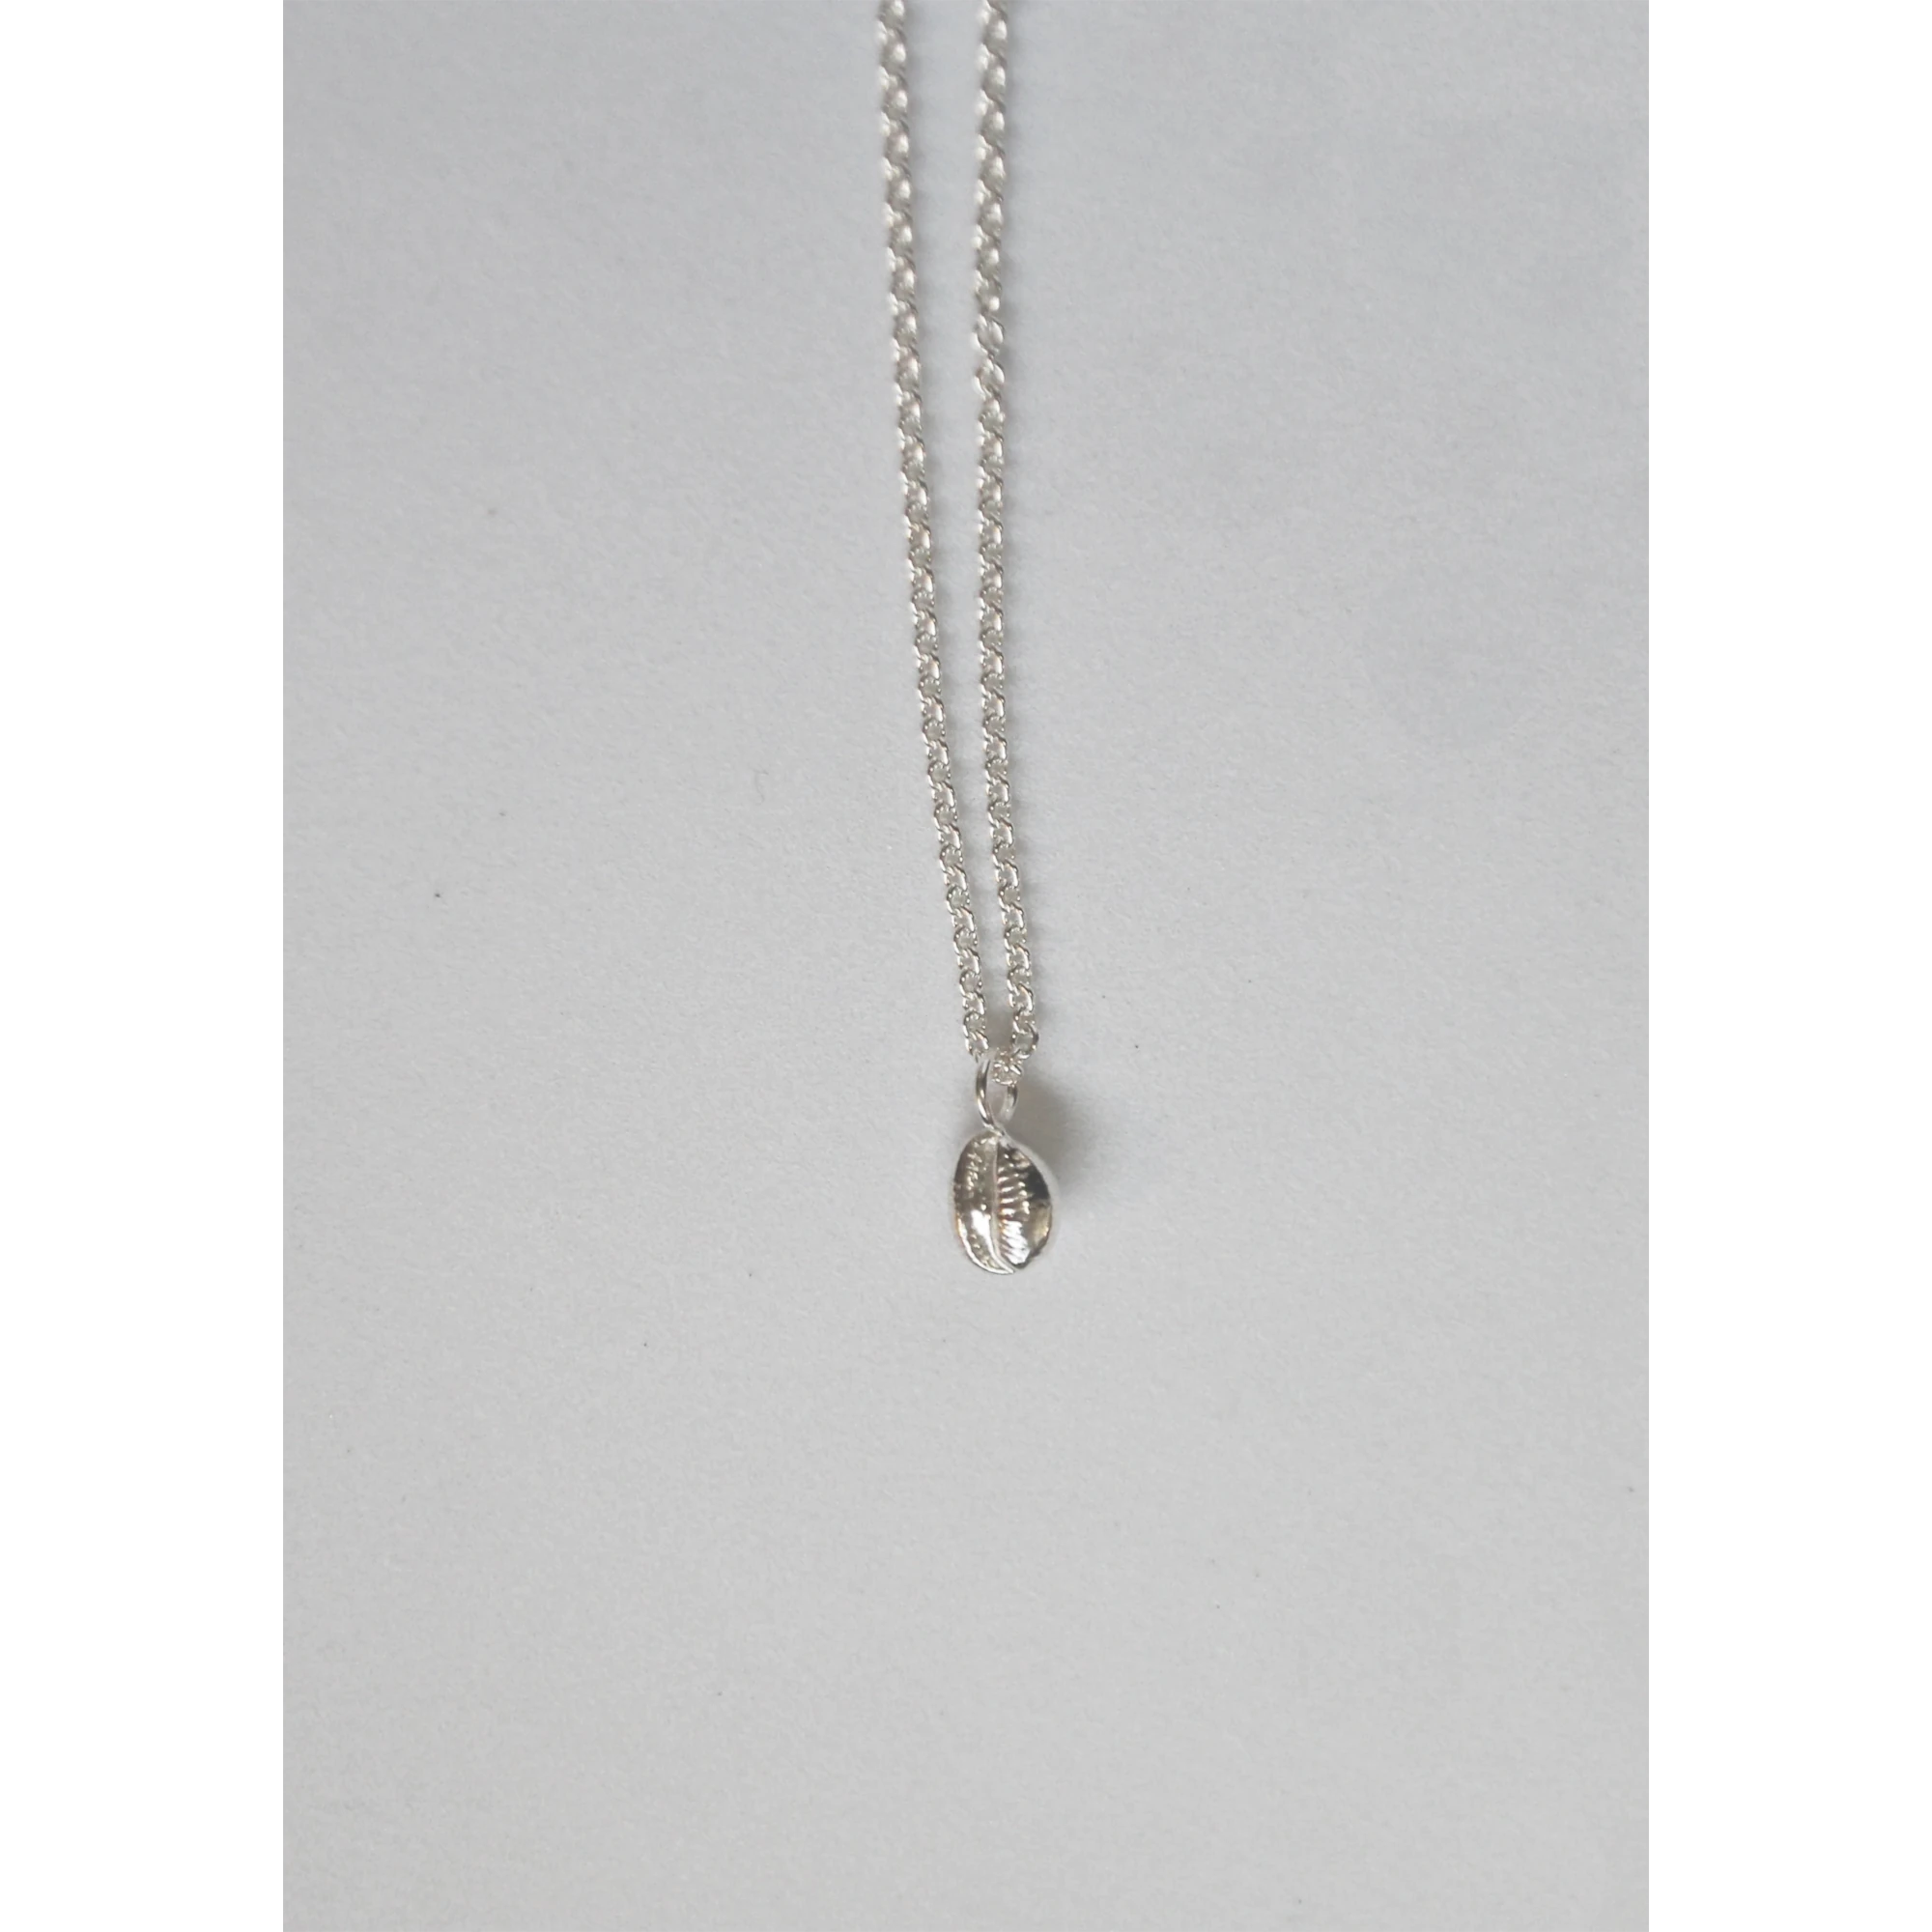 Tiny Cowri Shell Necklace in Silver by Hannah Bourn - Lifestory